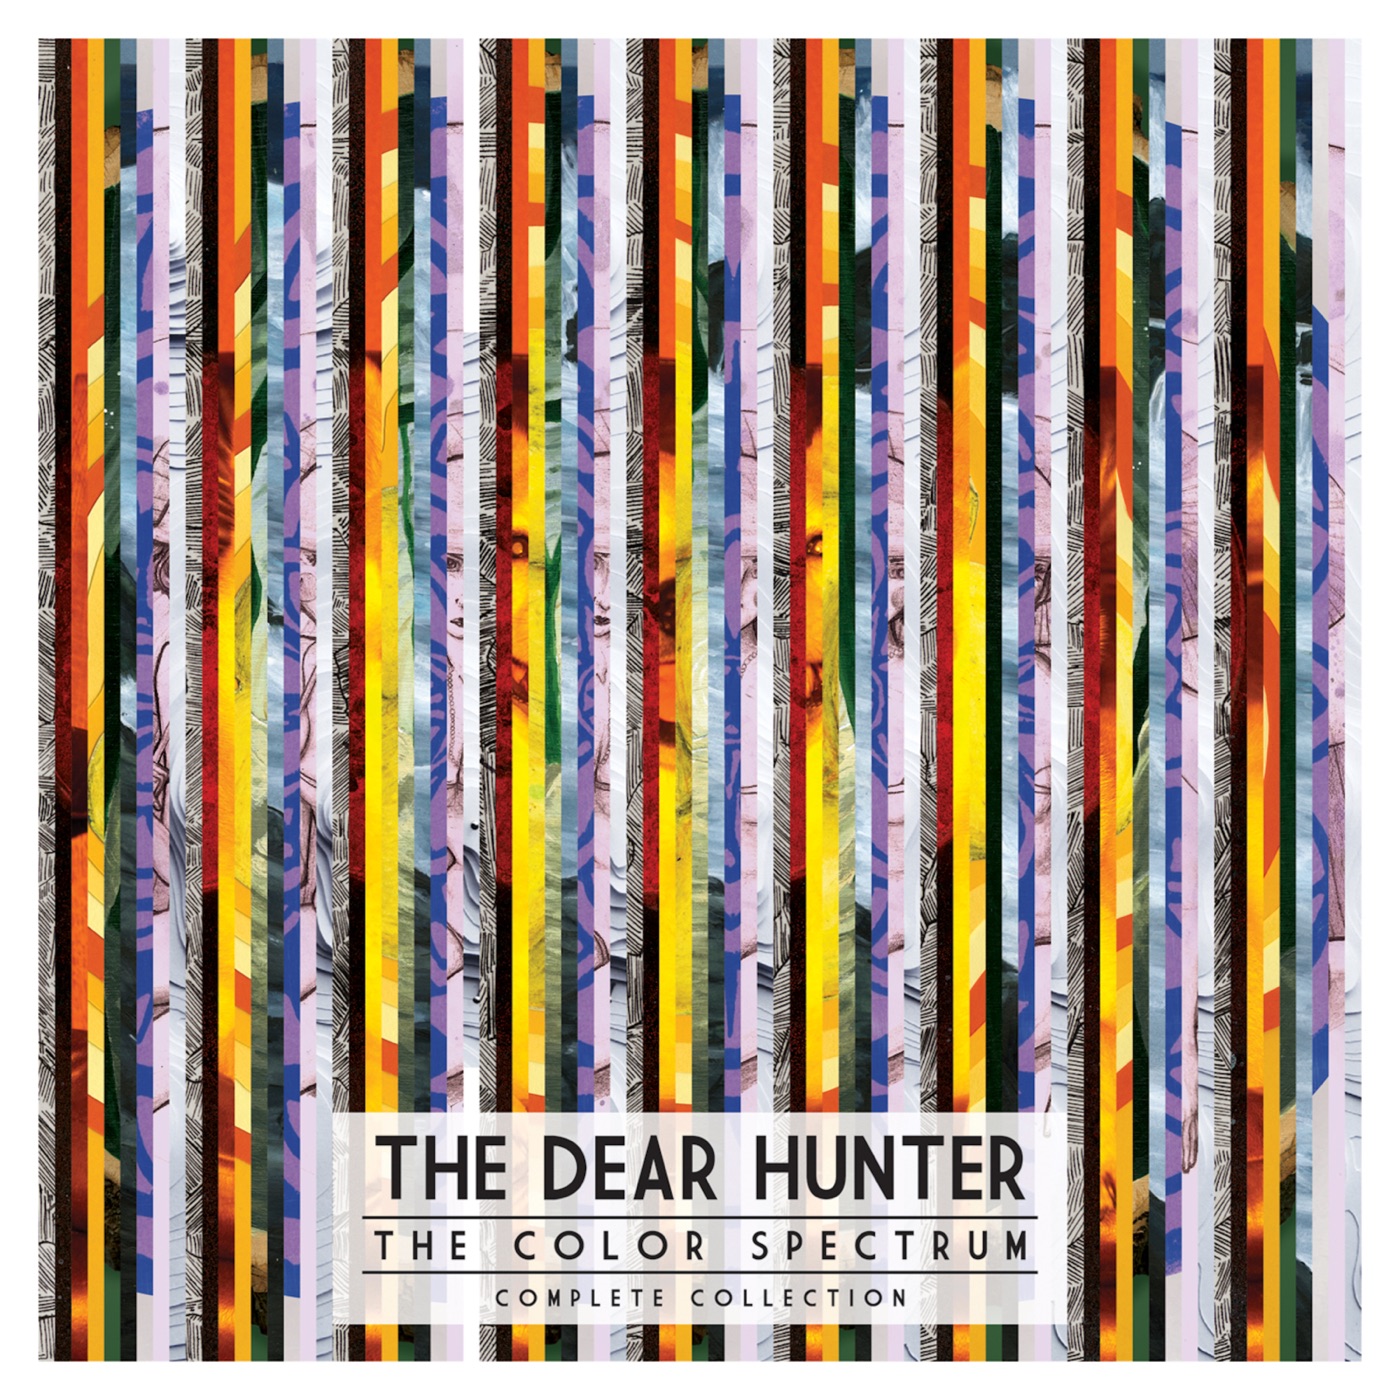 The Color Spectrum: The Complete Collection by The Dear Hunter